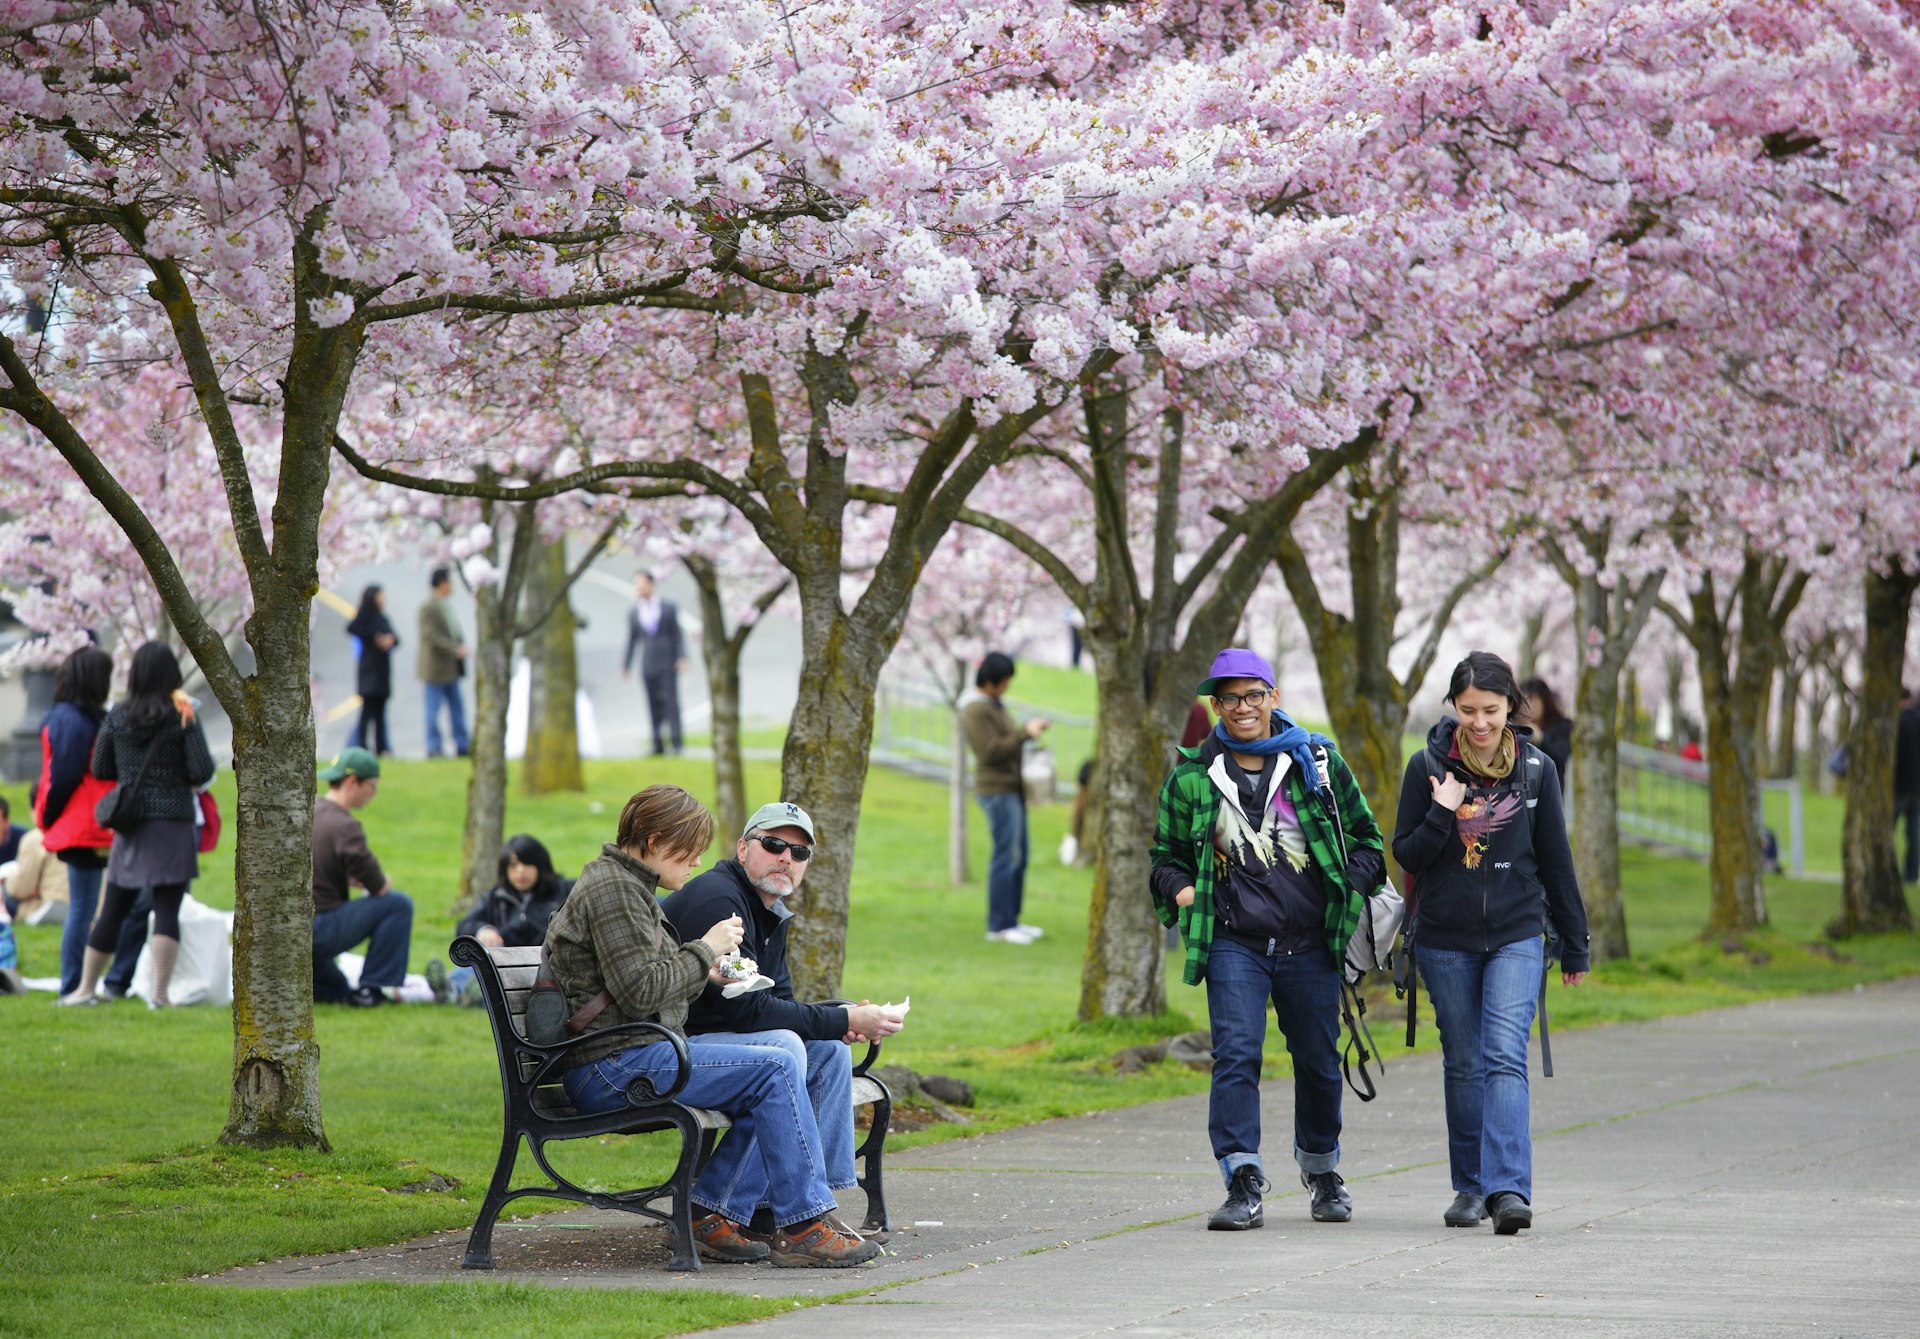 Pink cherry blossoms on trees lining a pathway in a city park. People are walking by or sat on benches under the trees.